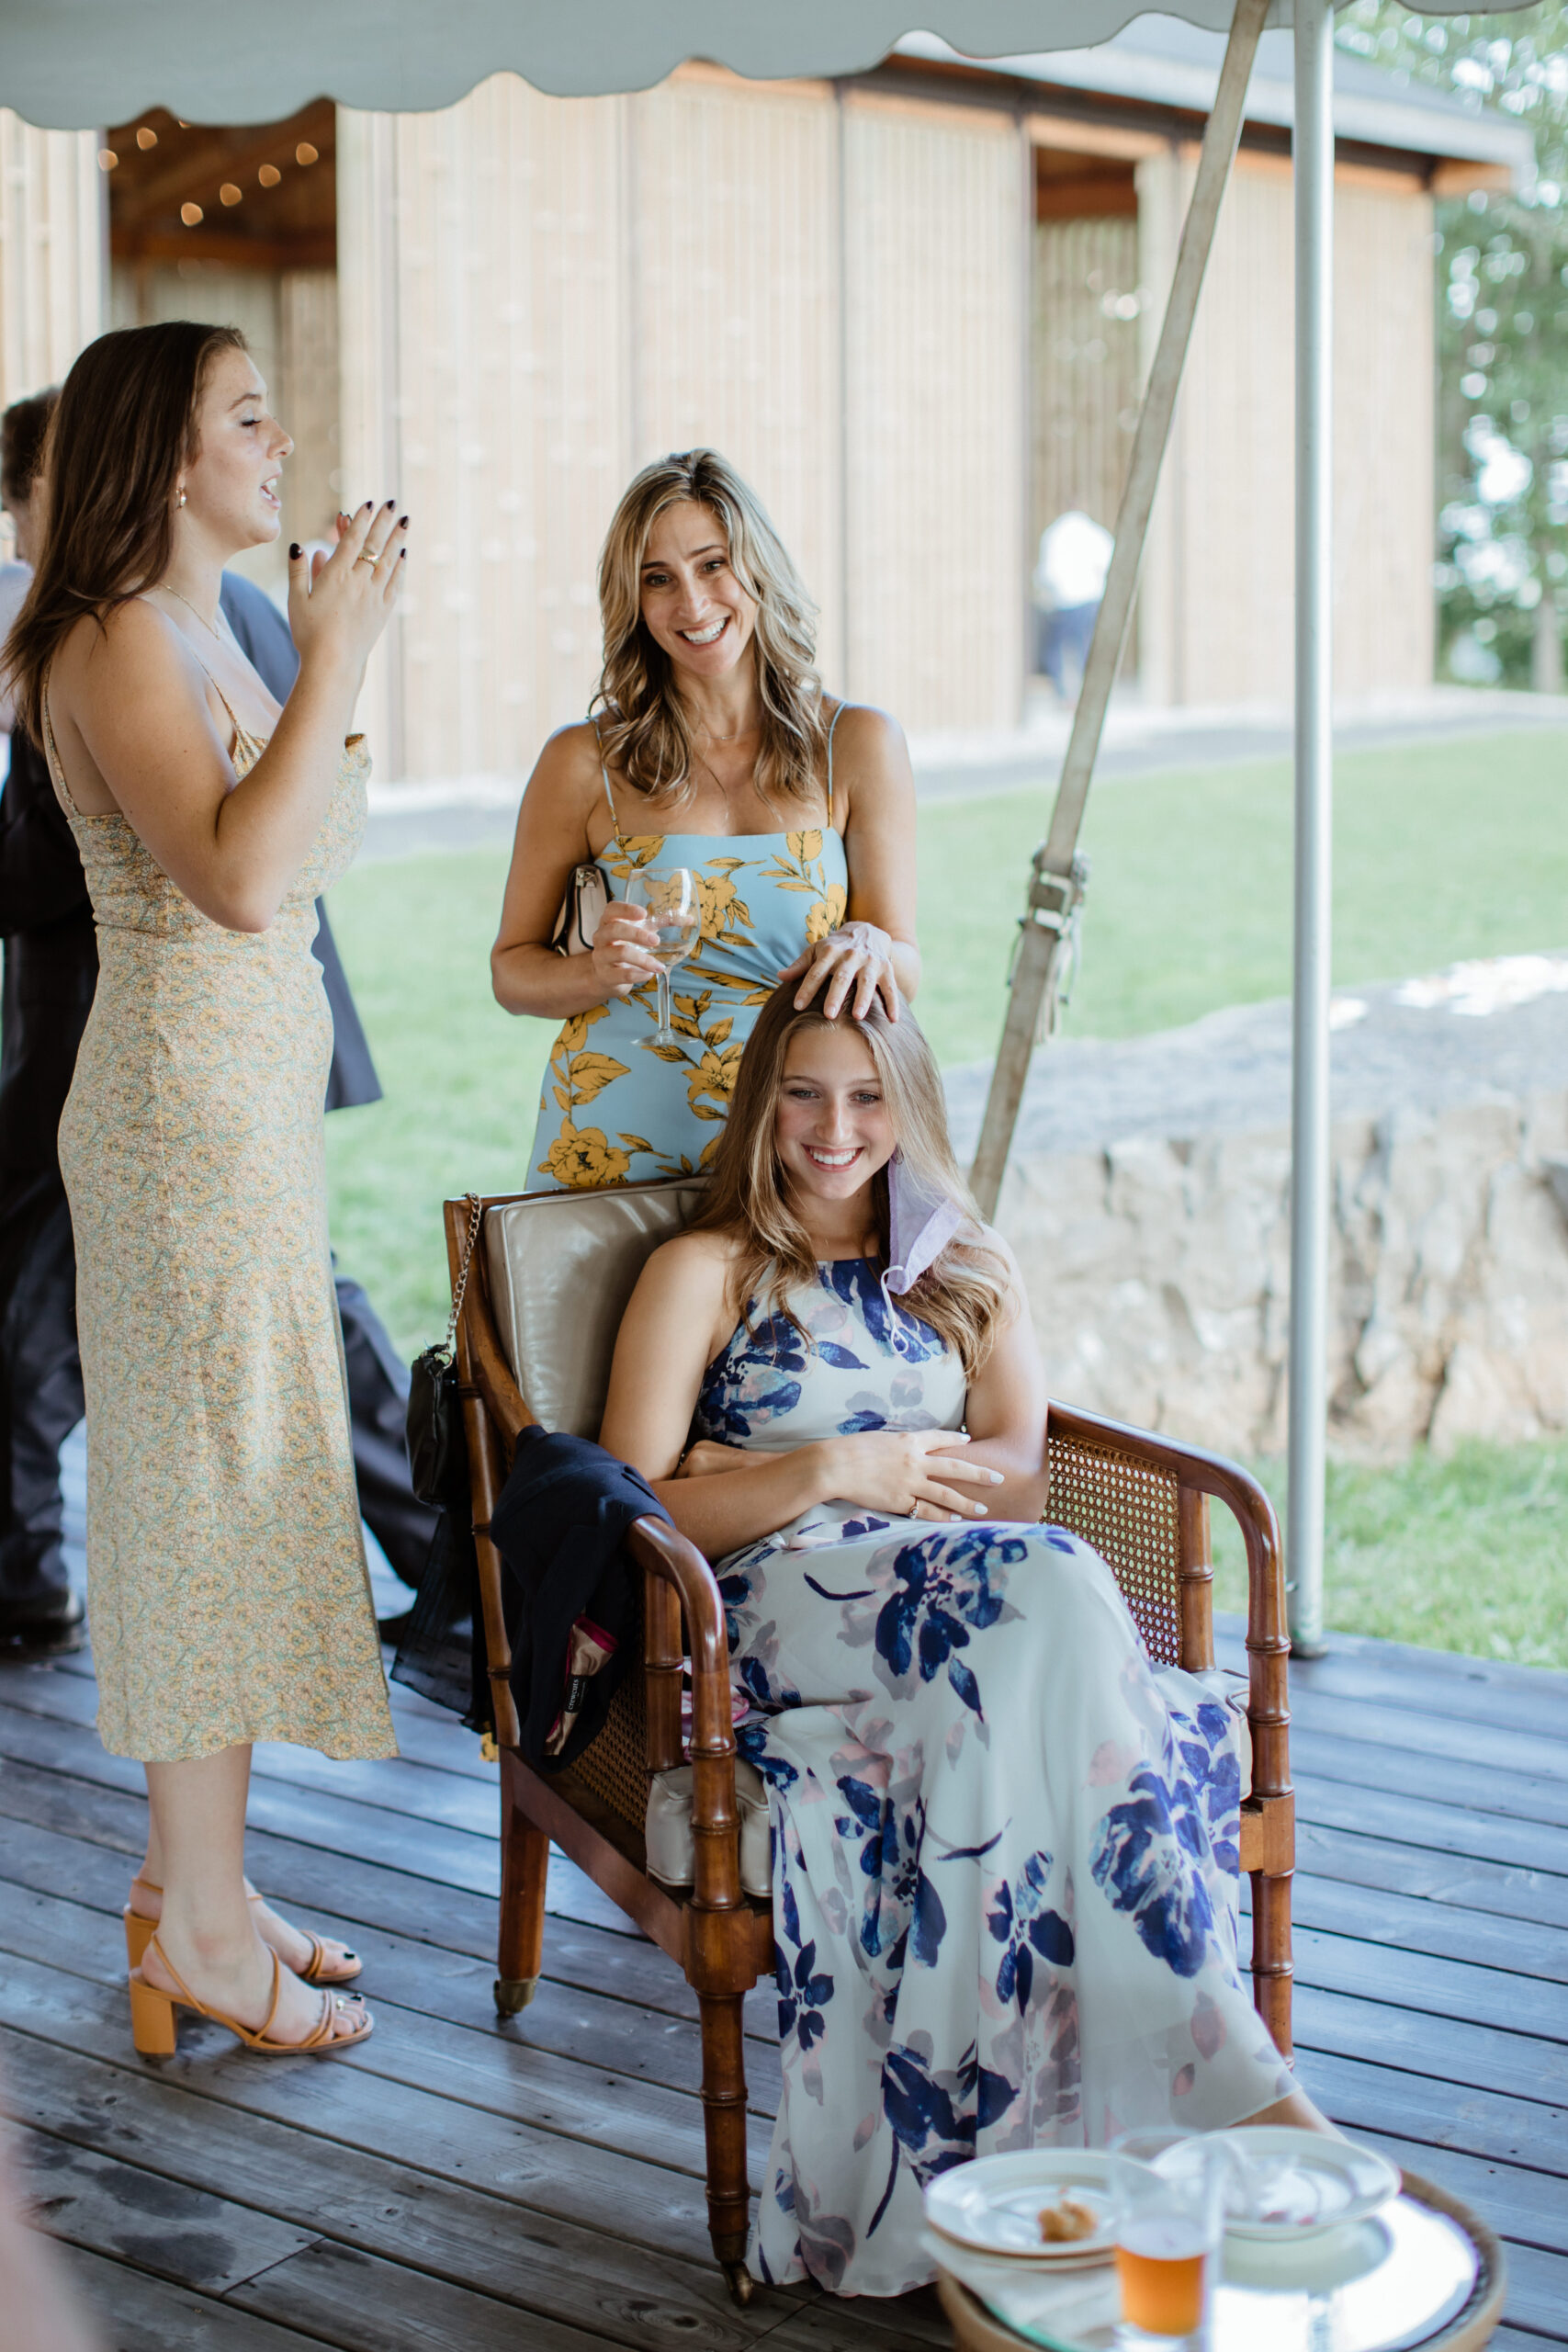 wedding guests laugh and enjoy the modern upstate New York wedding venue